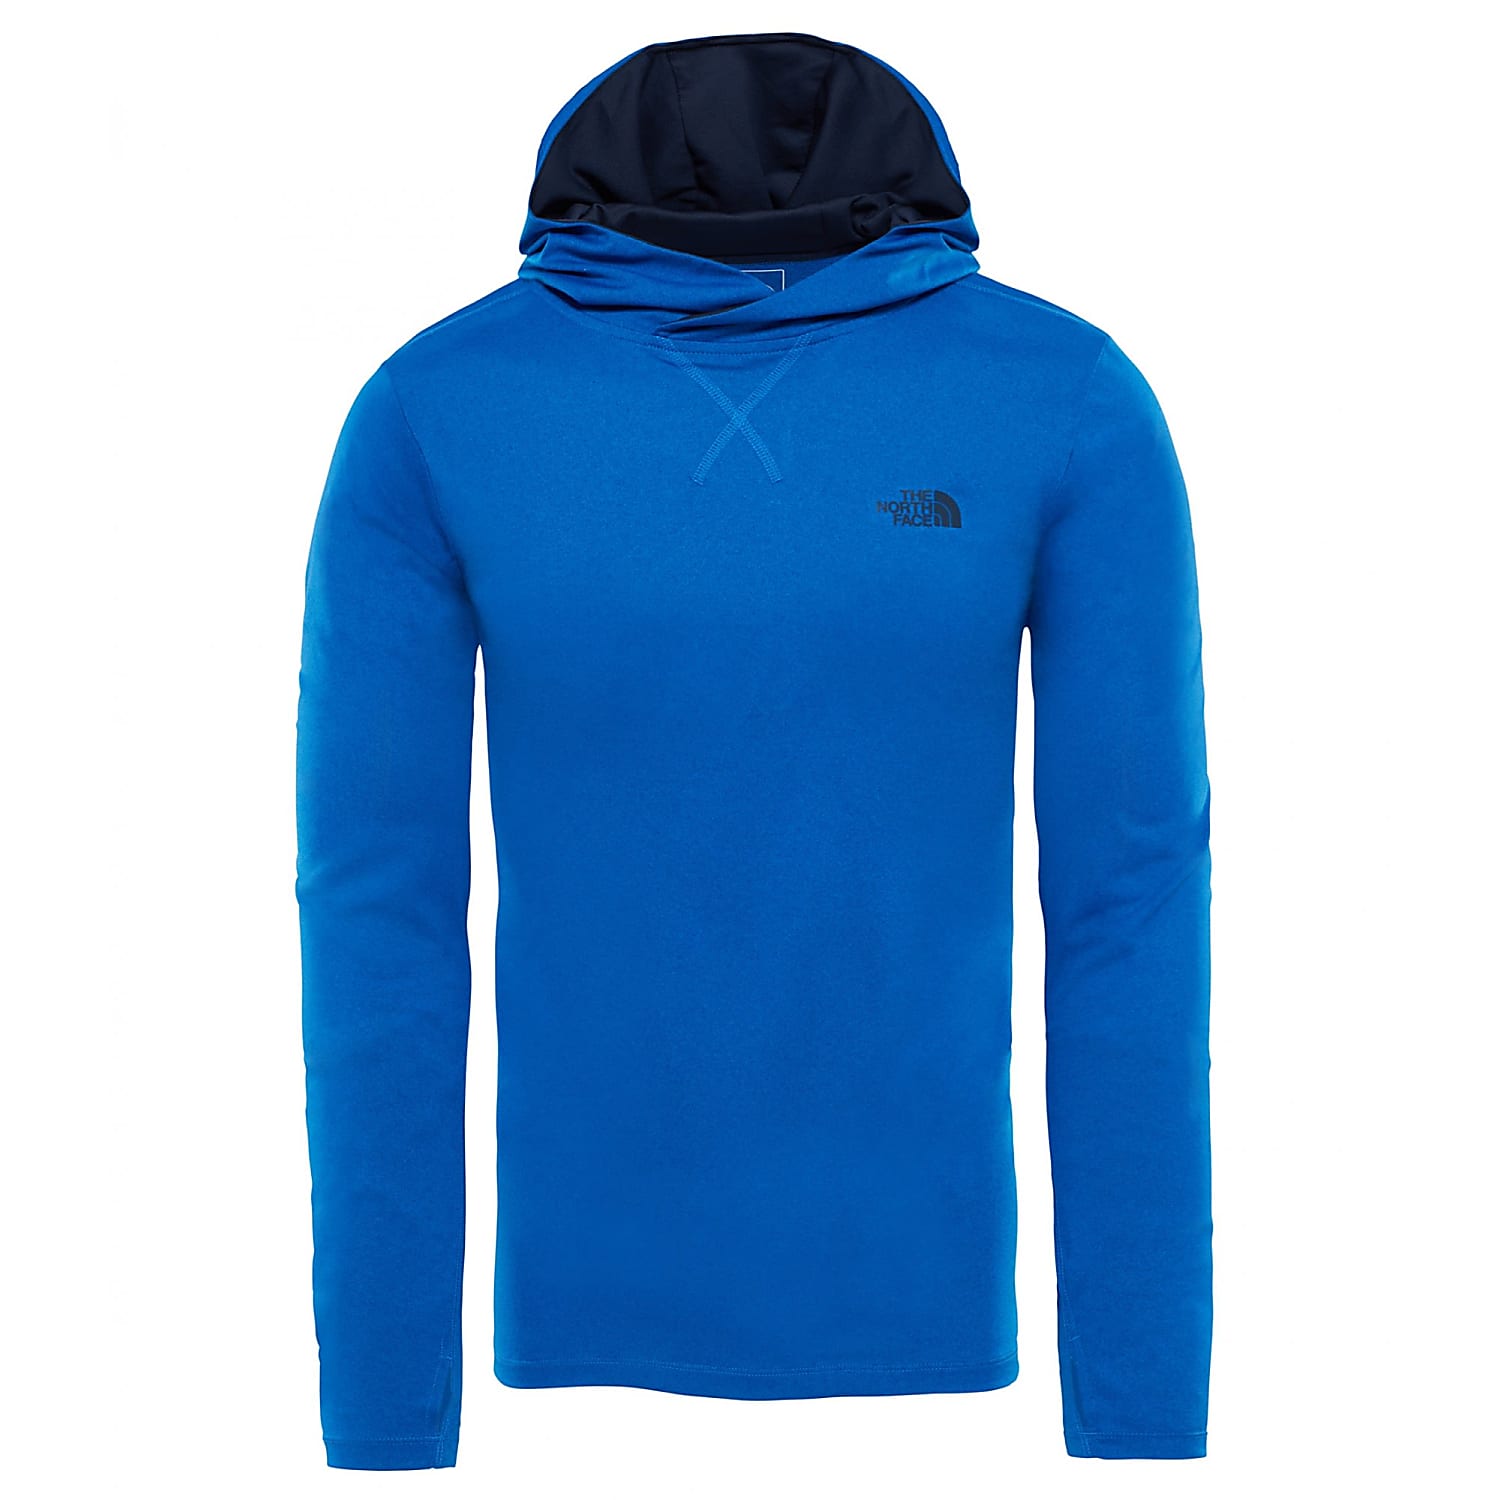 the north face men's reactor hoodie